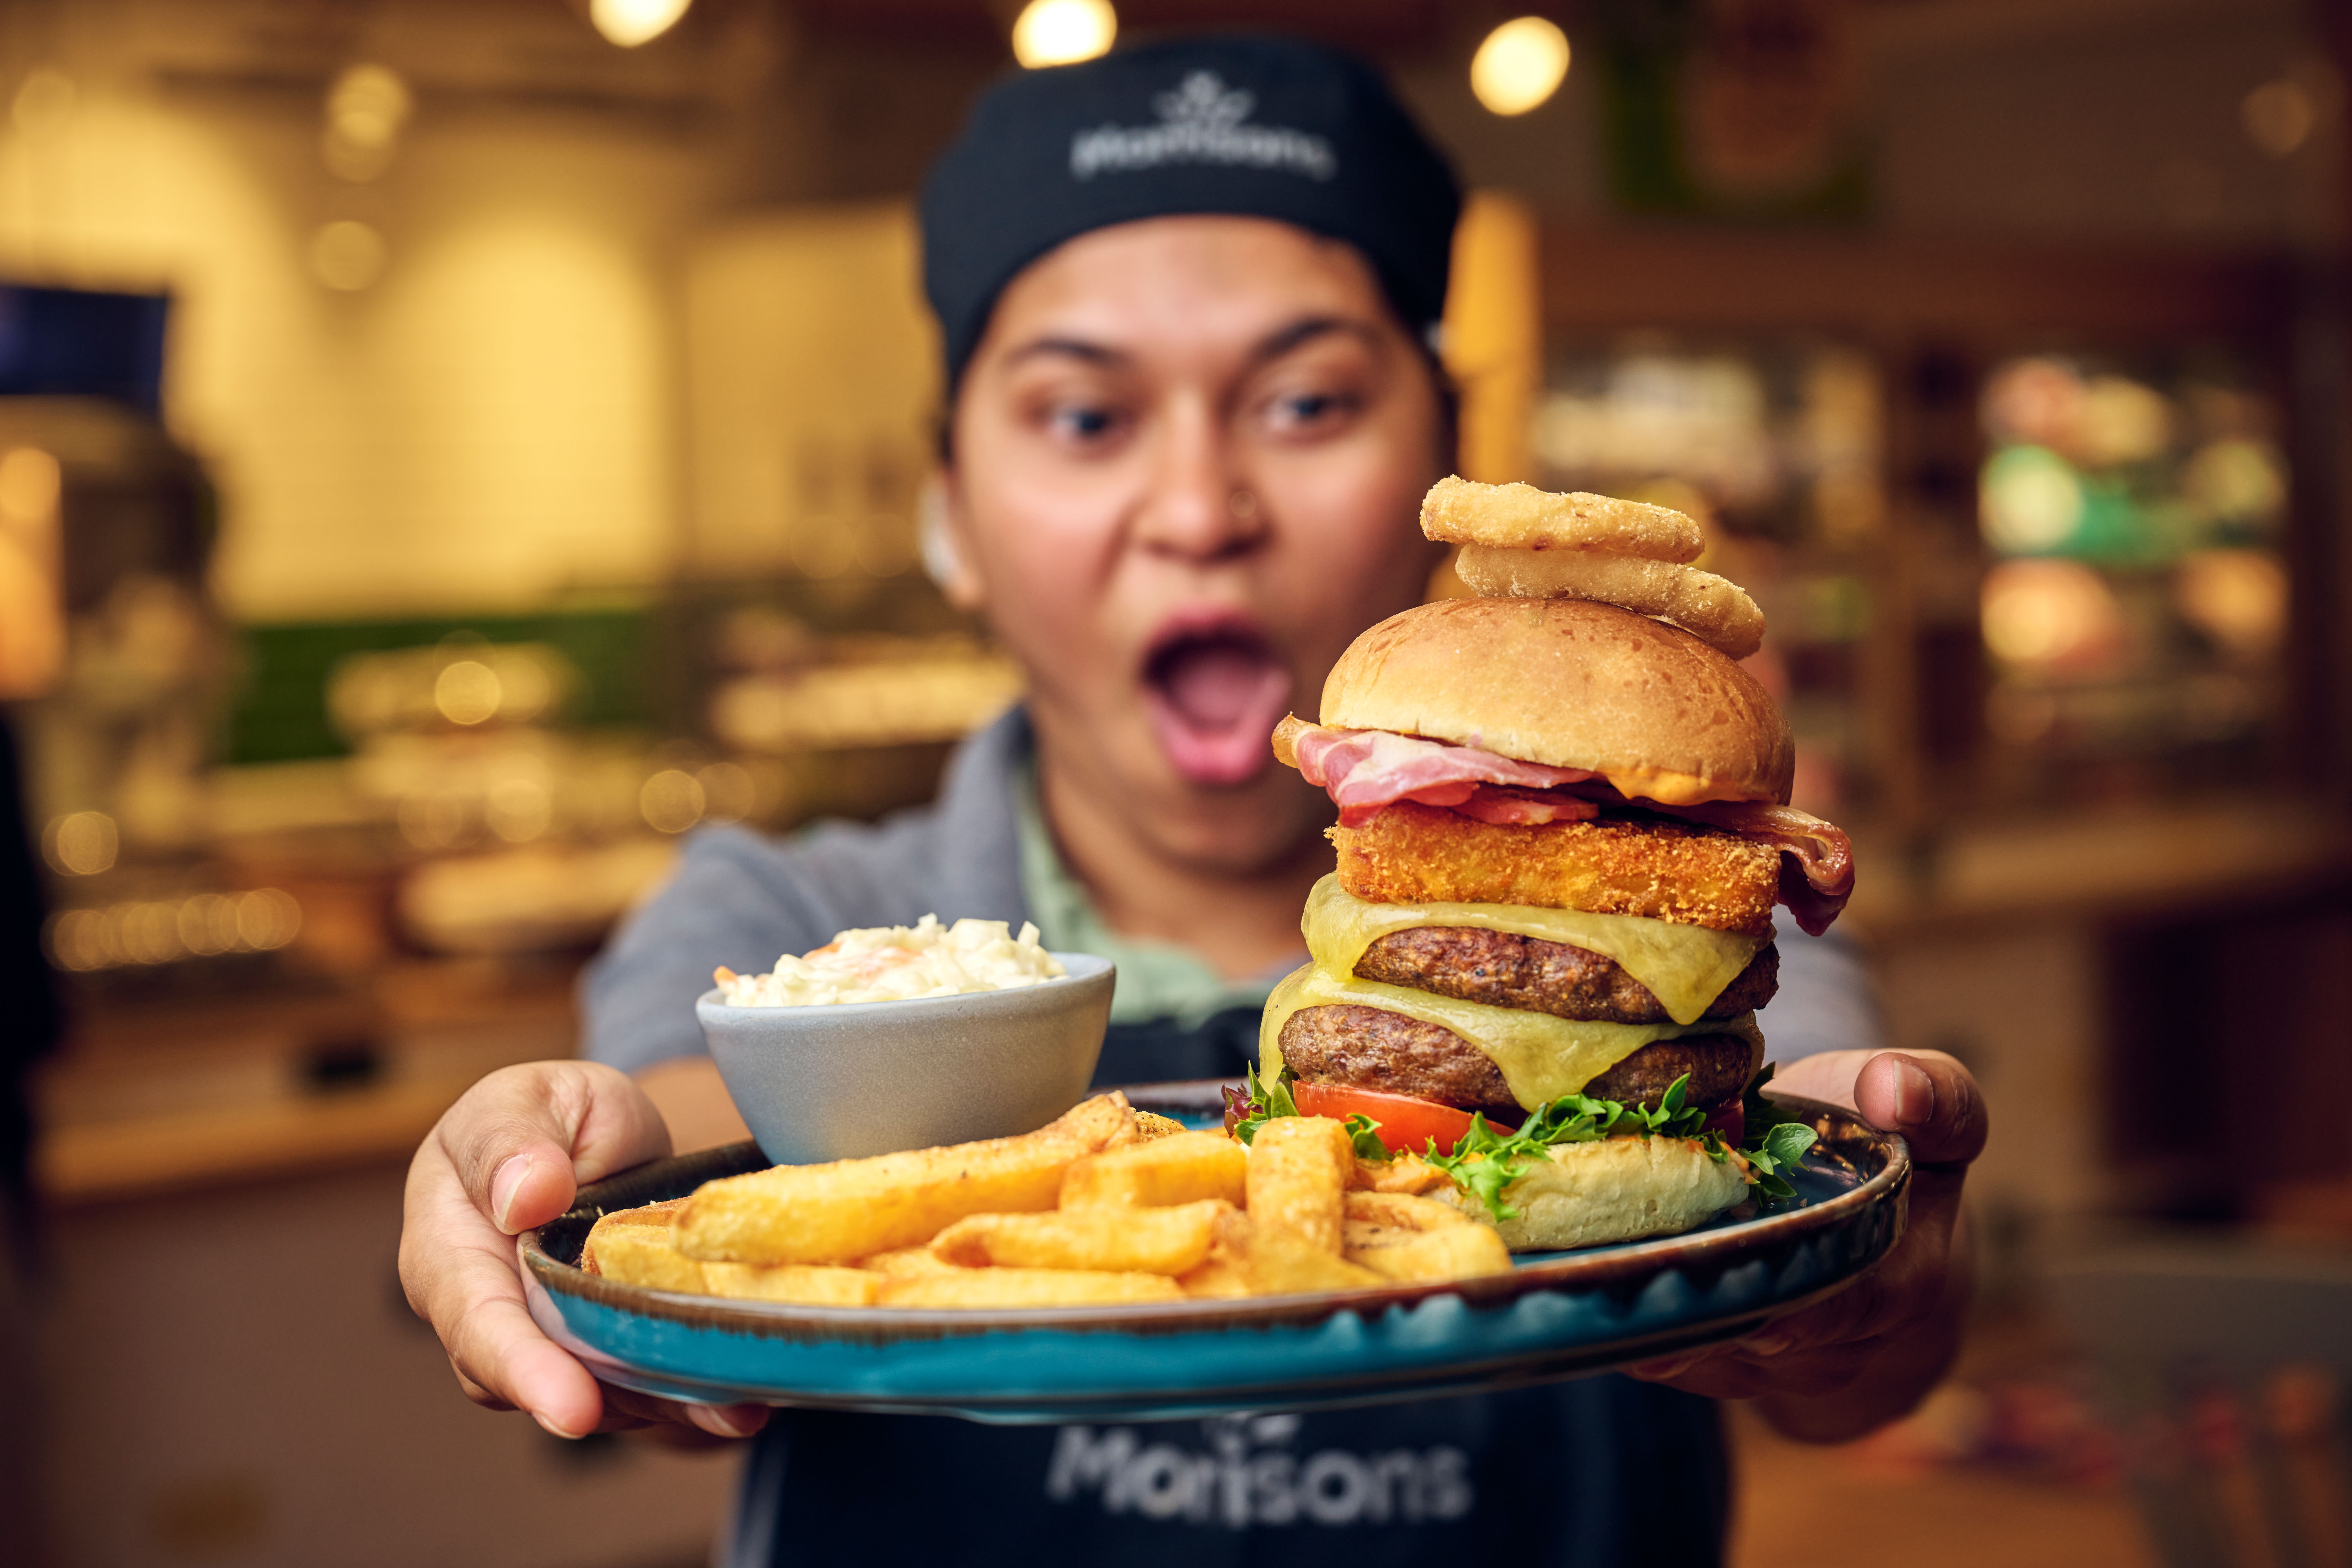 Daddy of all burgers: Morrisons launches giant burger in cafés for Father's week